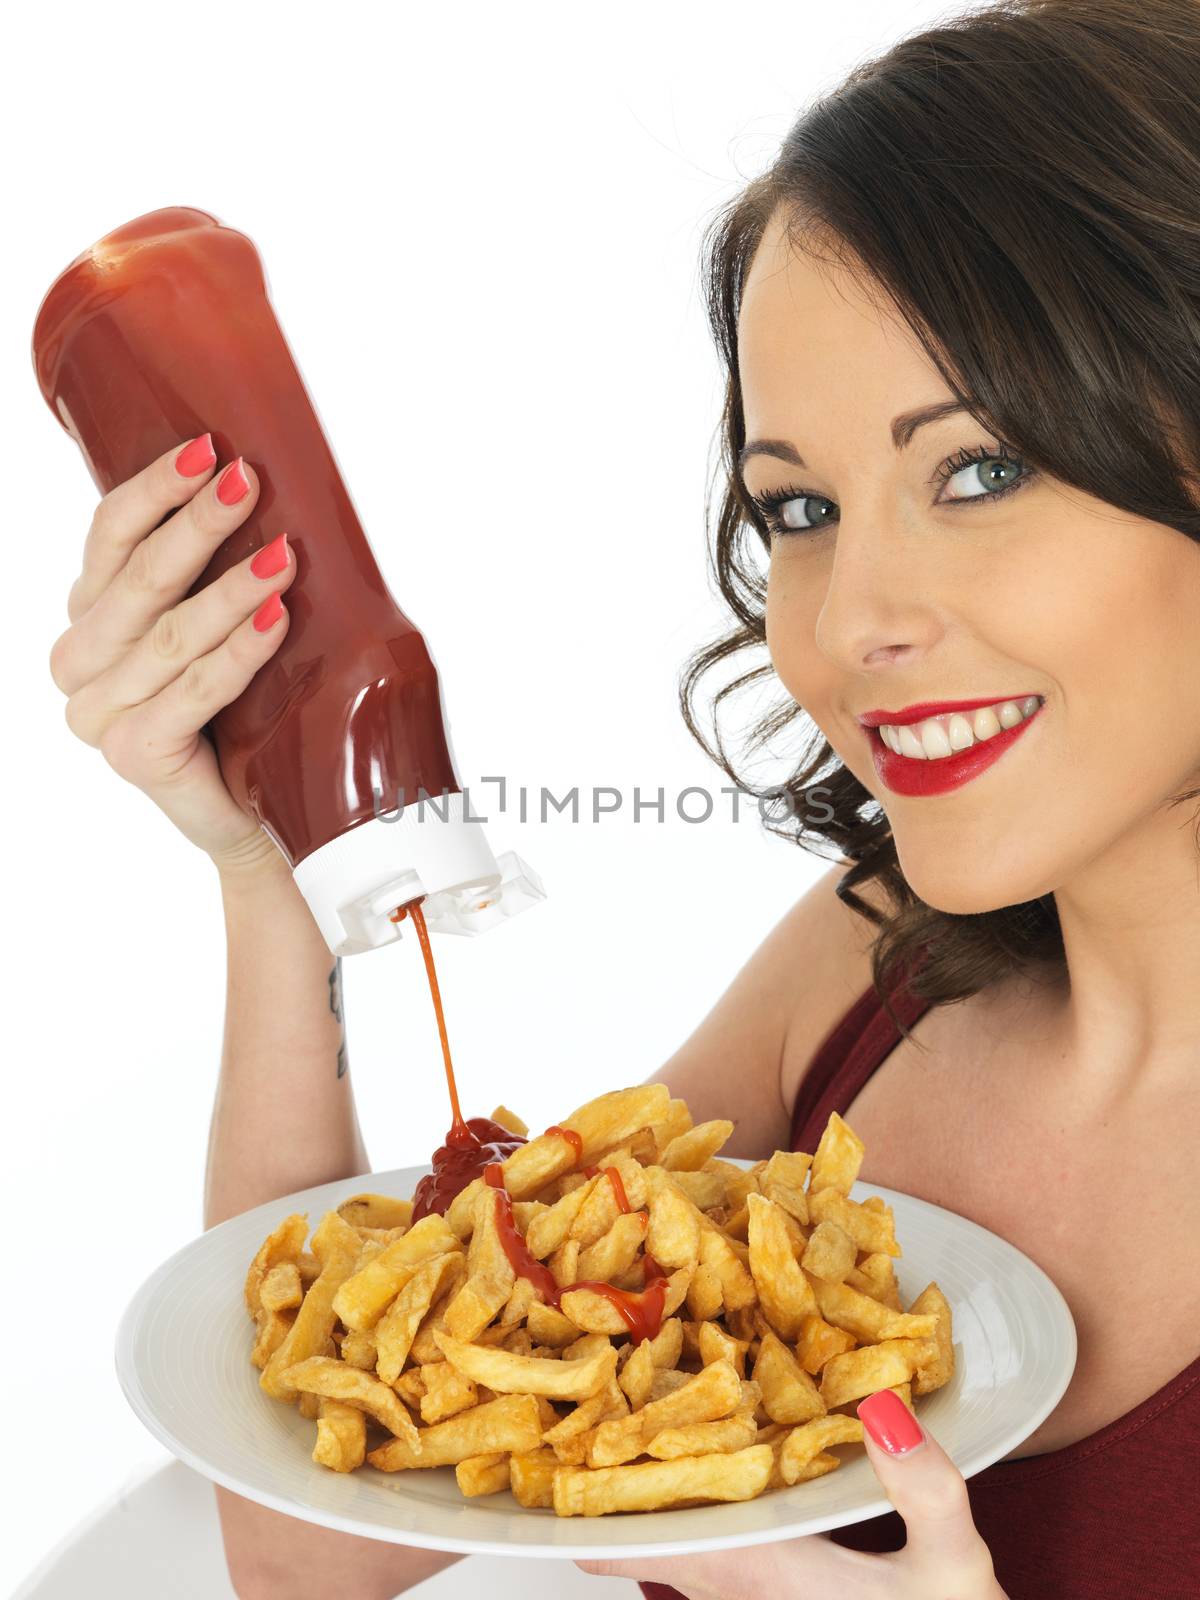 Young Woman Eating a Large Plate of Fried Chips by Whiteboxmedia